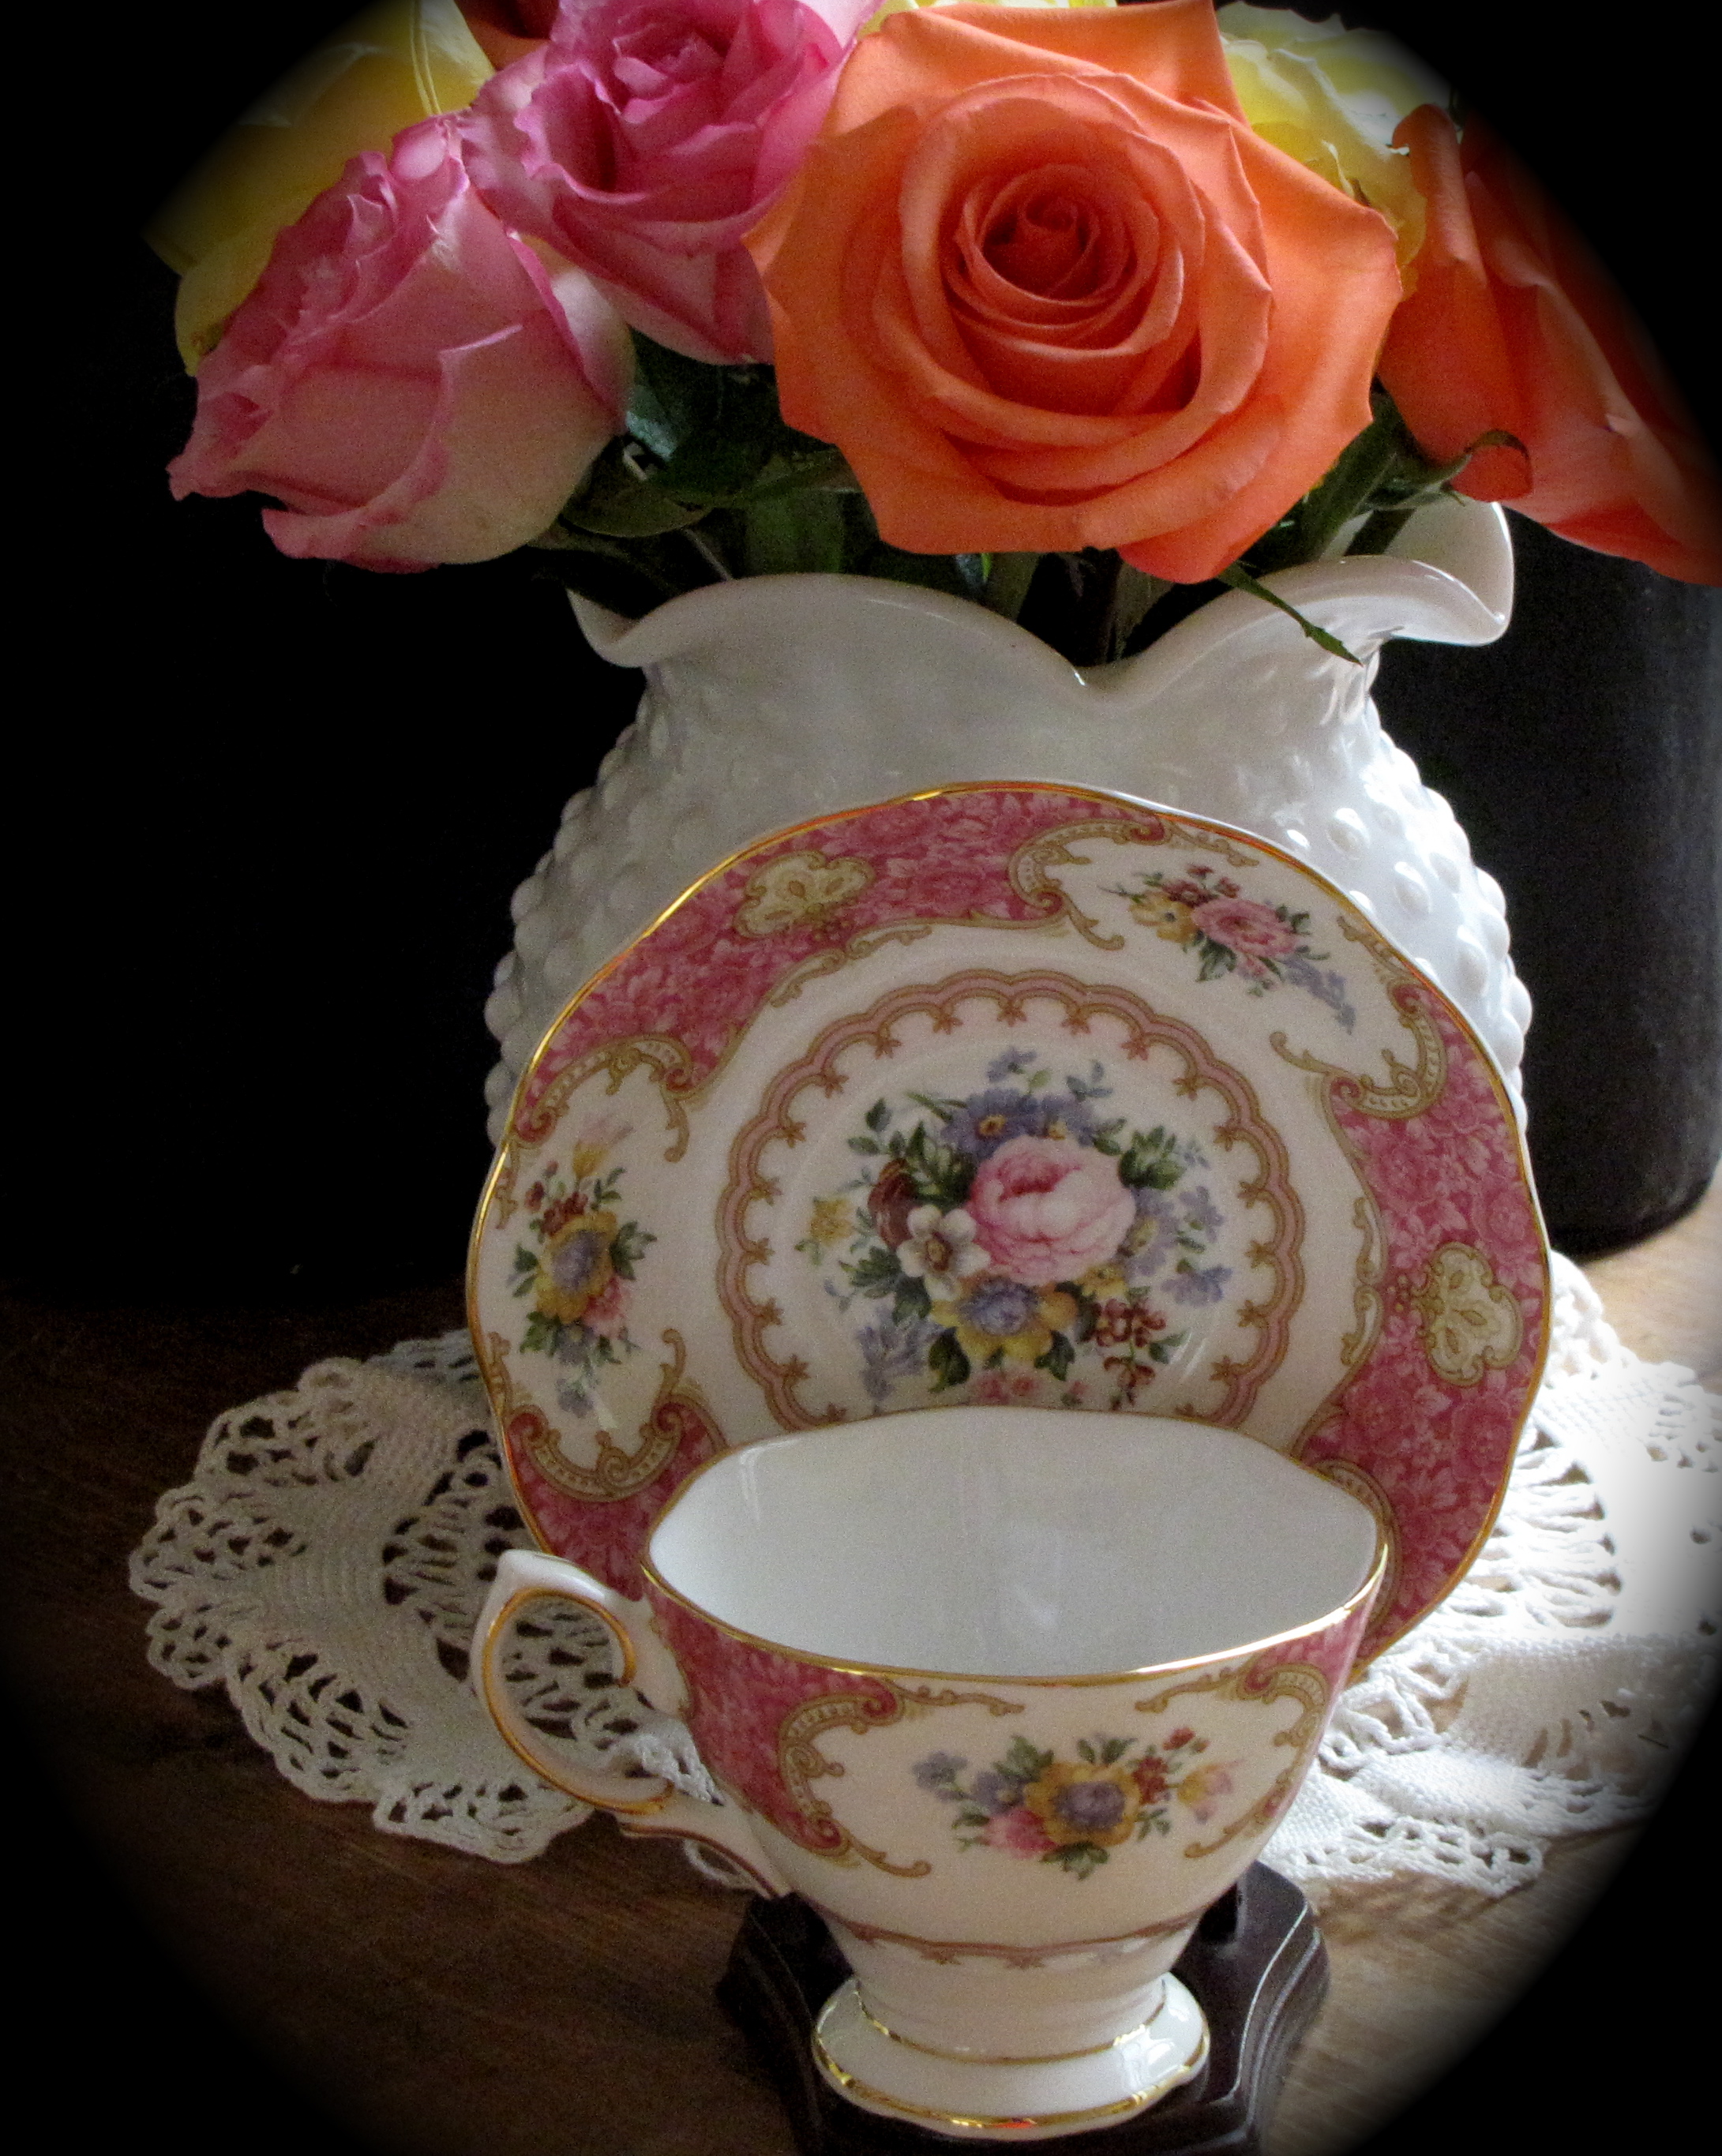 Tea with Lady Carlyle